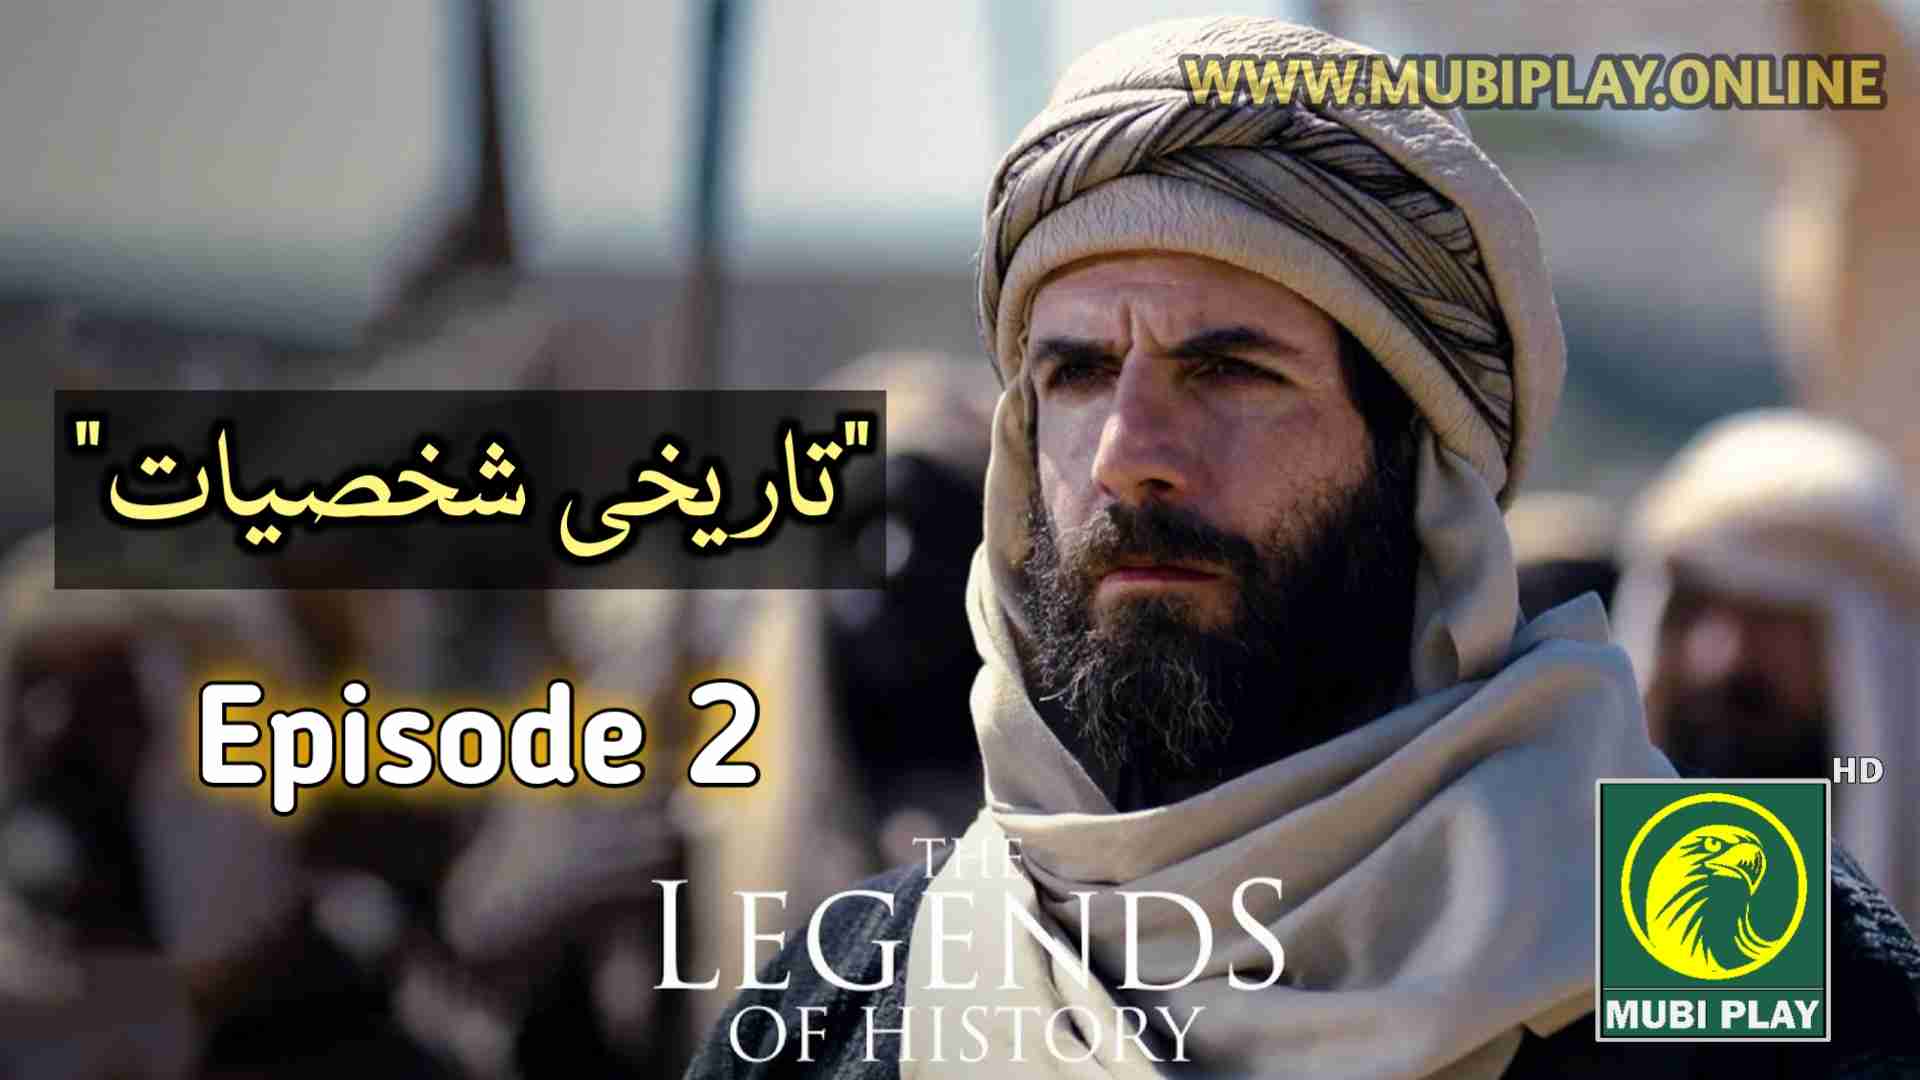 Legends of History Episode 2 with Urdu Subtitles by MubiPlay